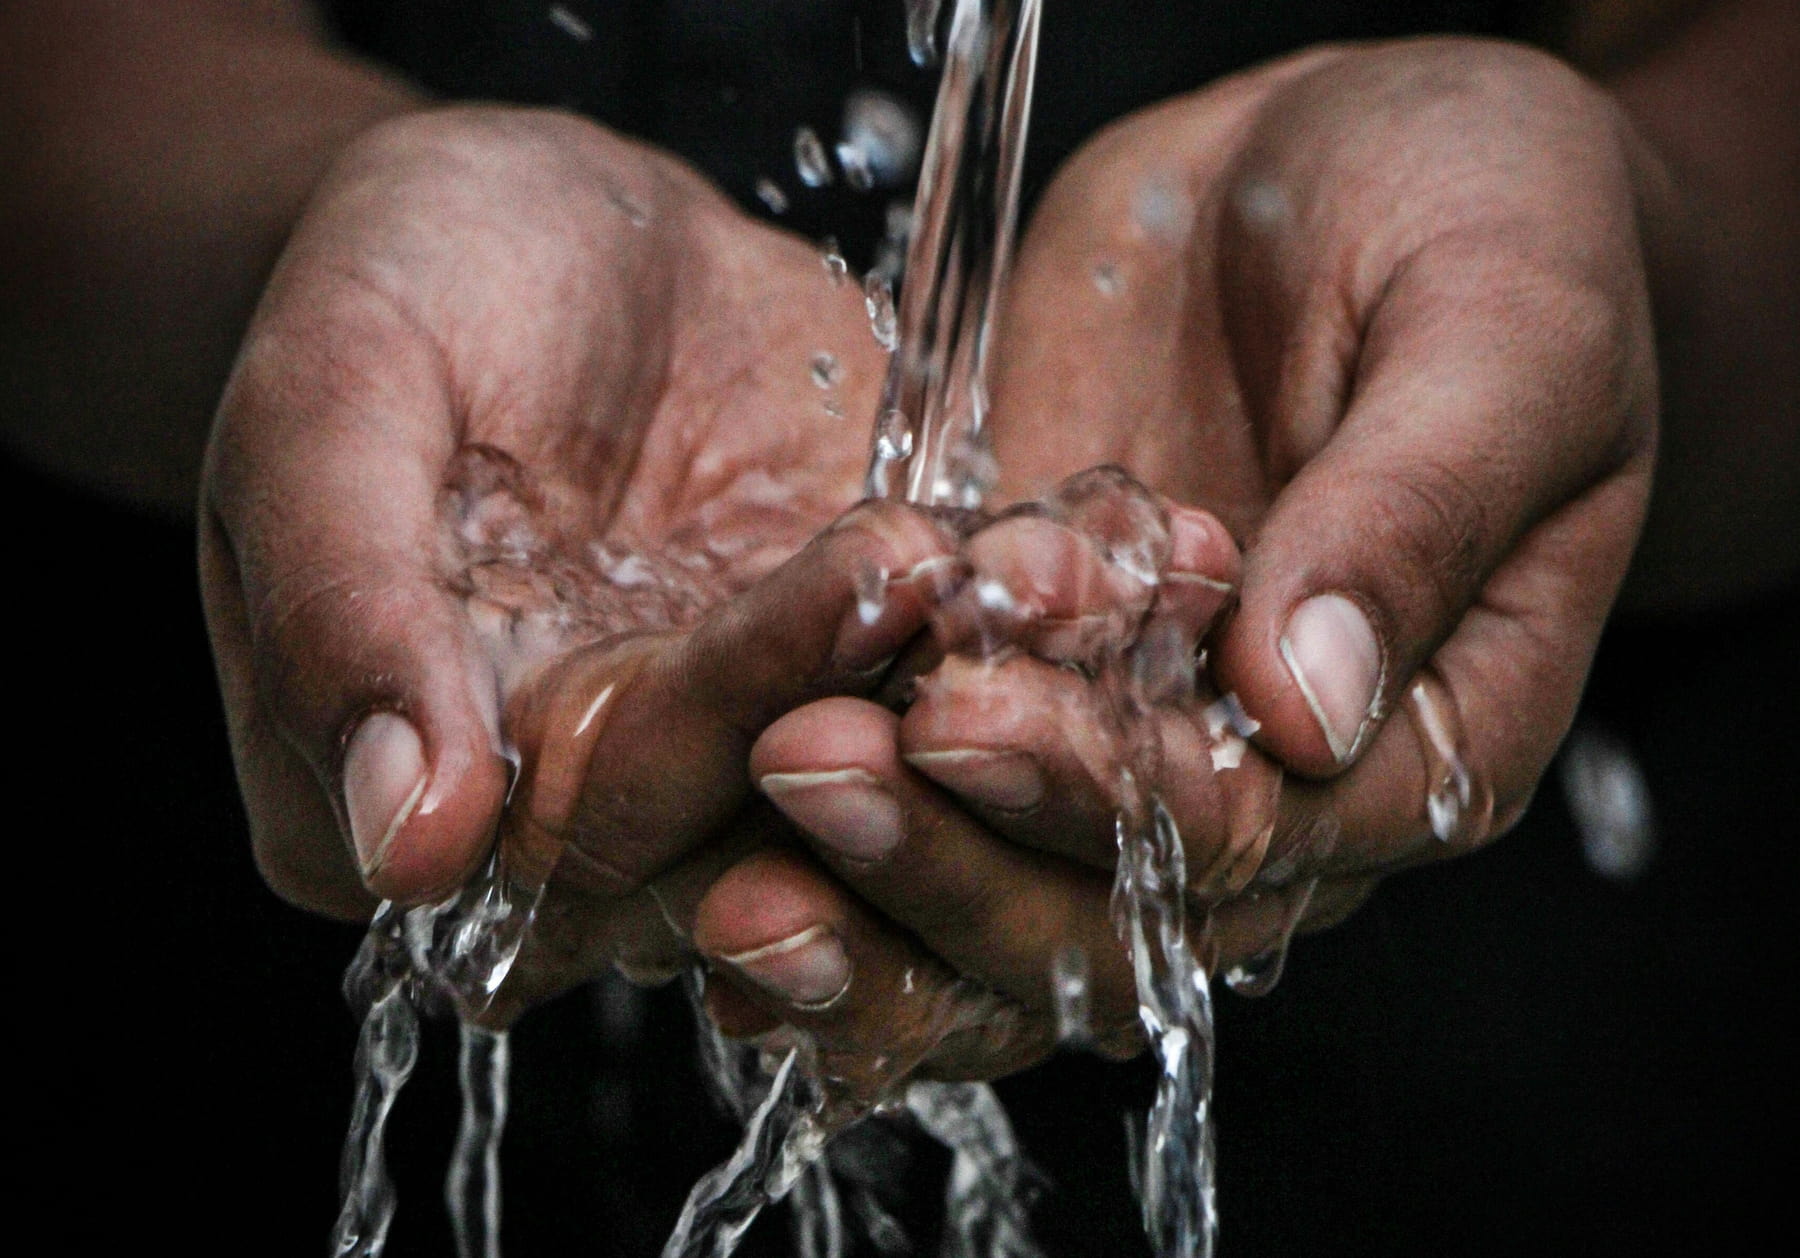 Water splashing from a tap onto clasped hands